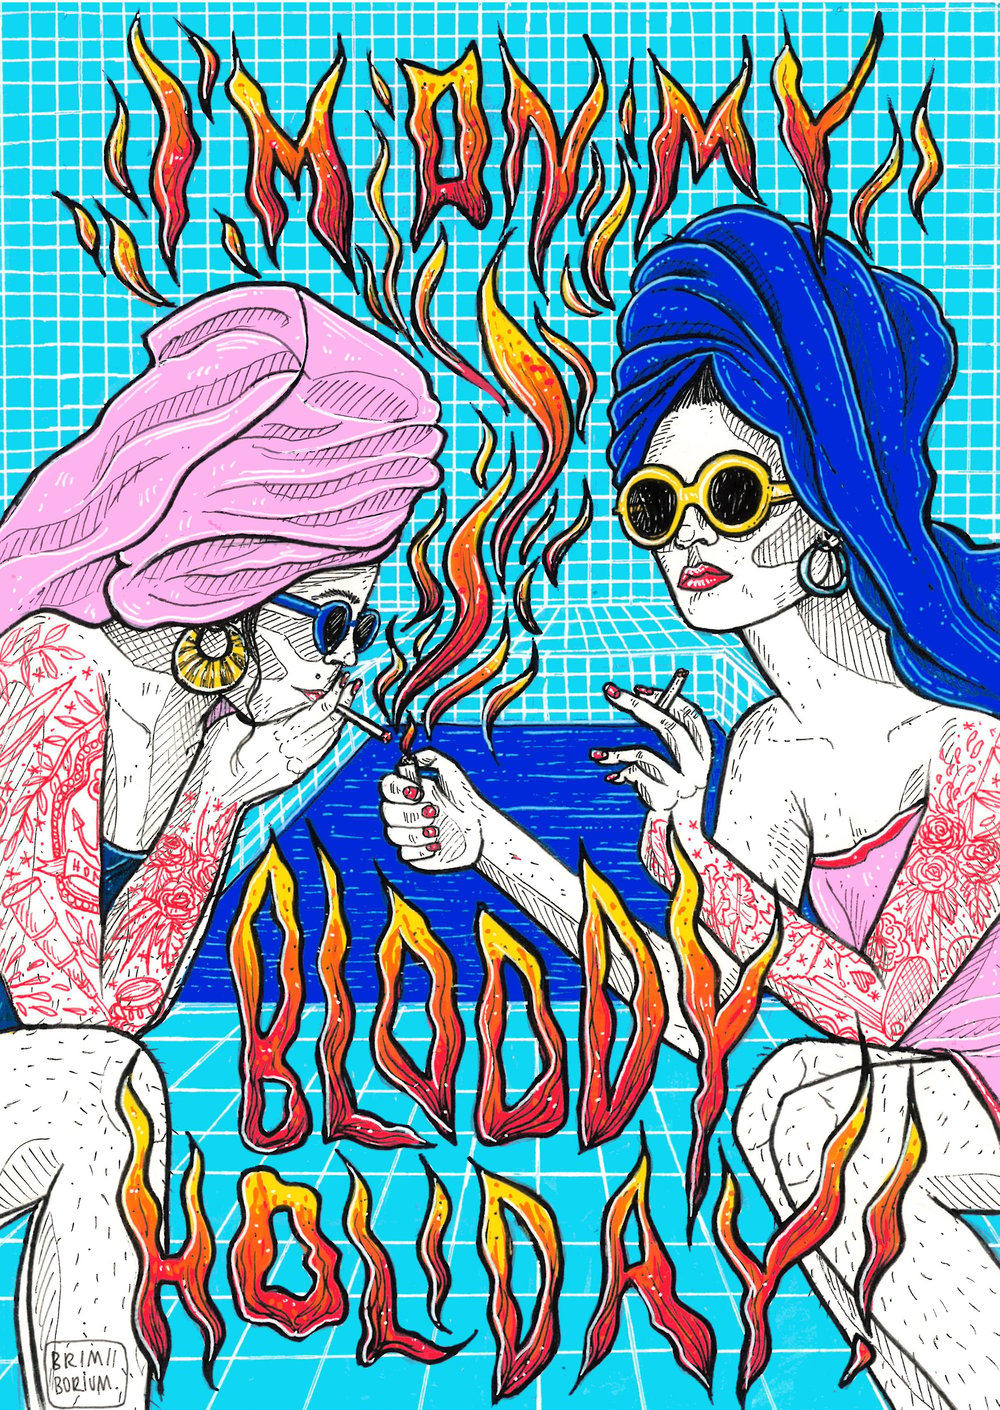 'BLOODY HOLIDAY' original illustration (A4, frame incl.)